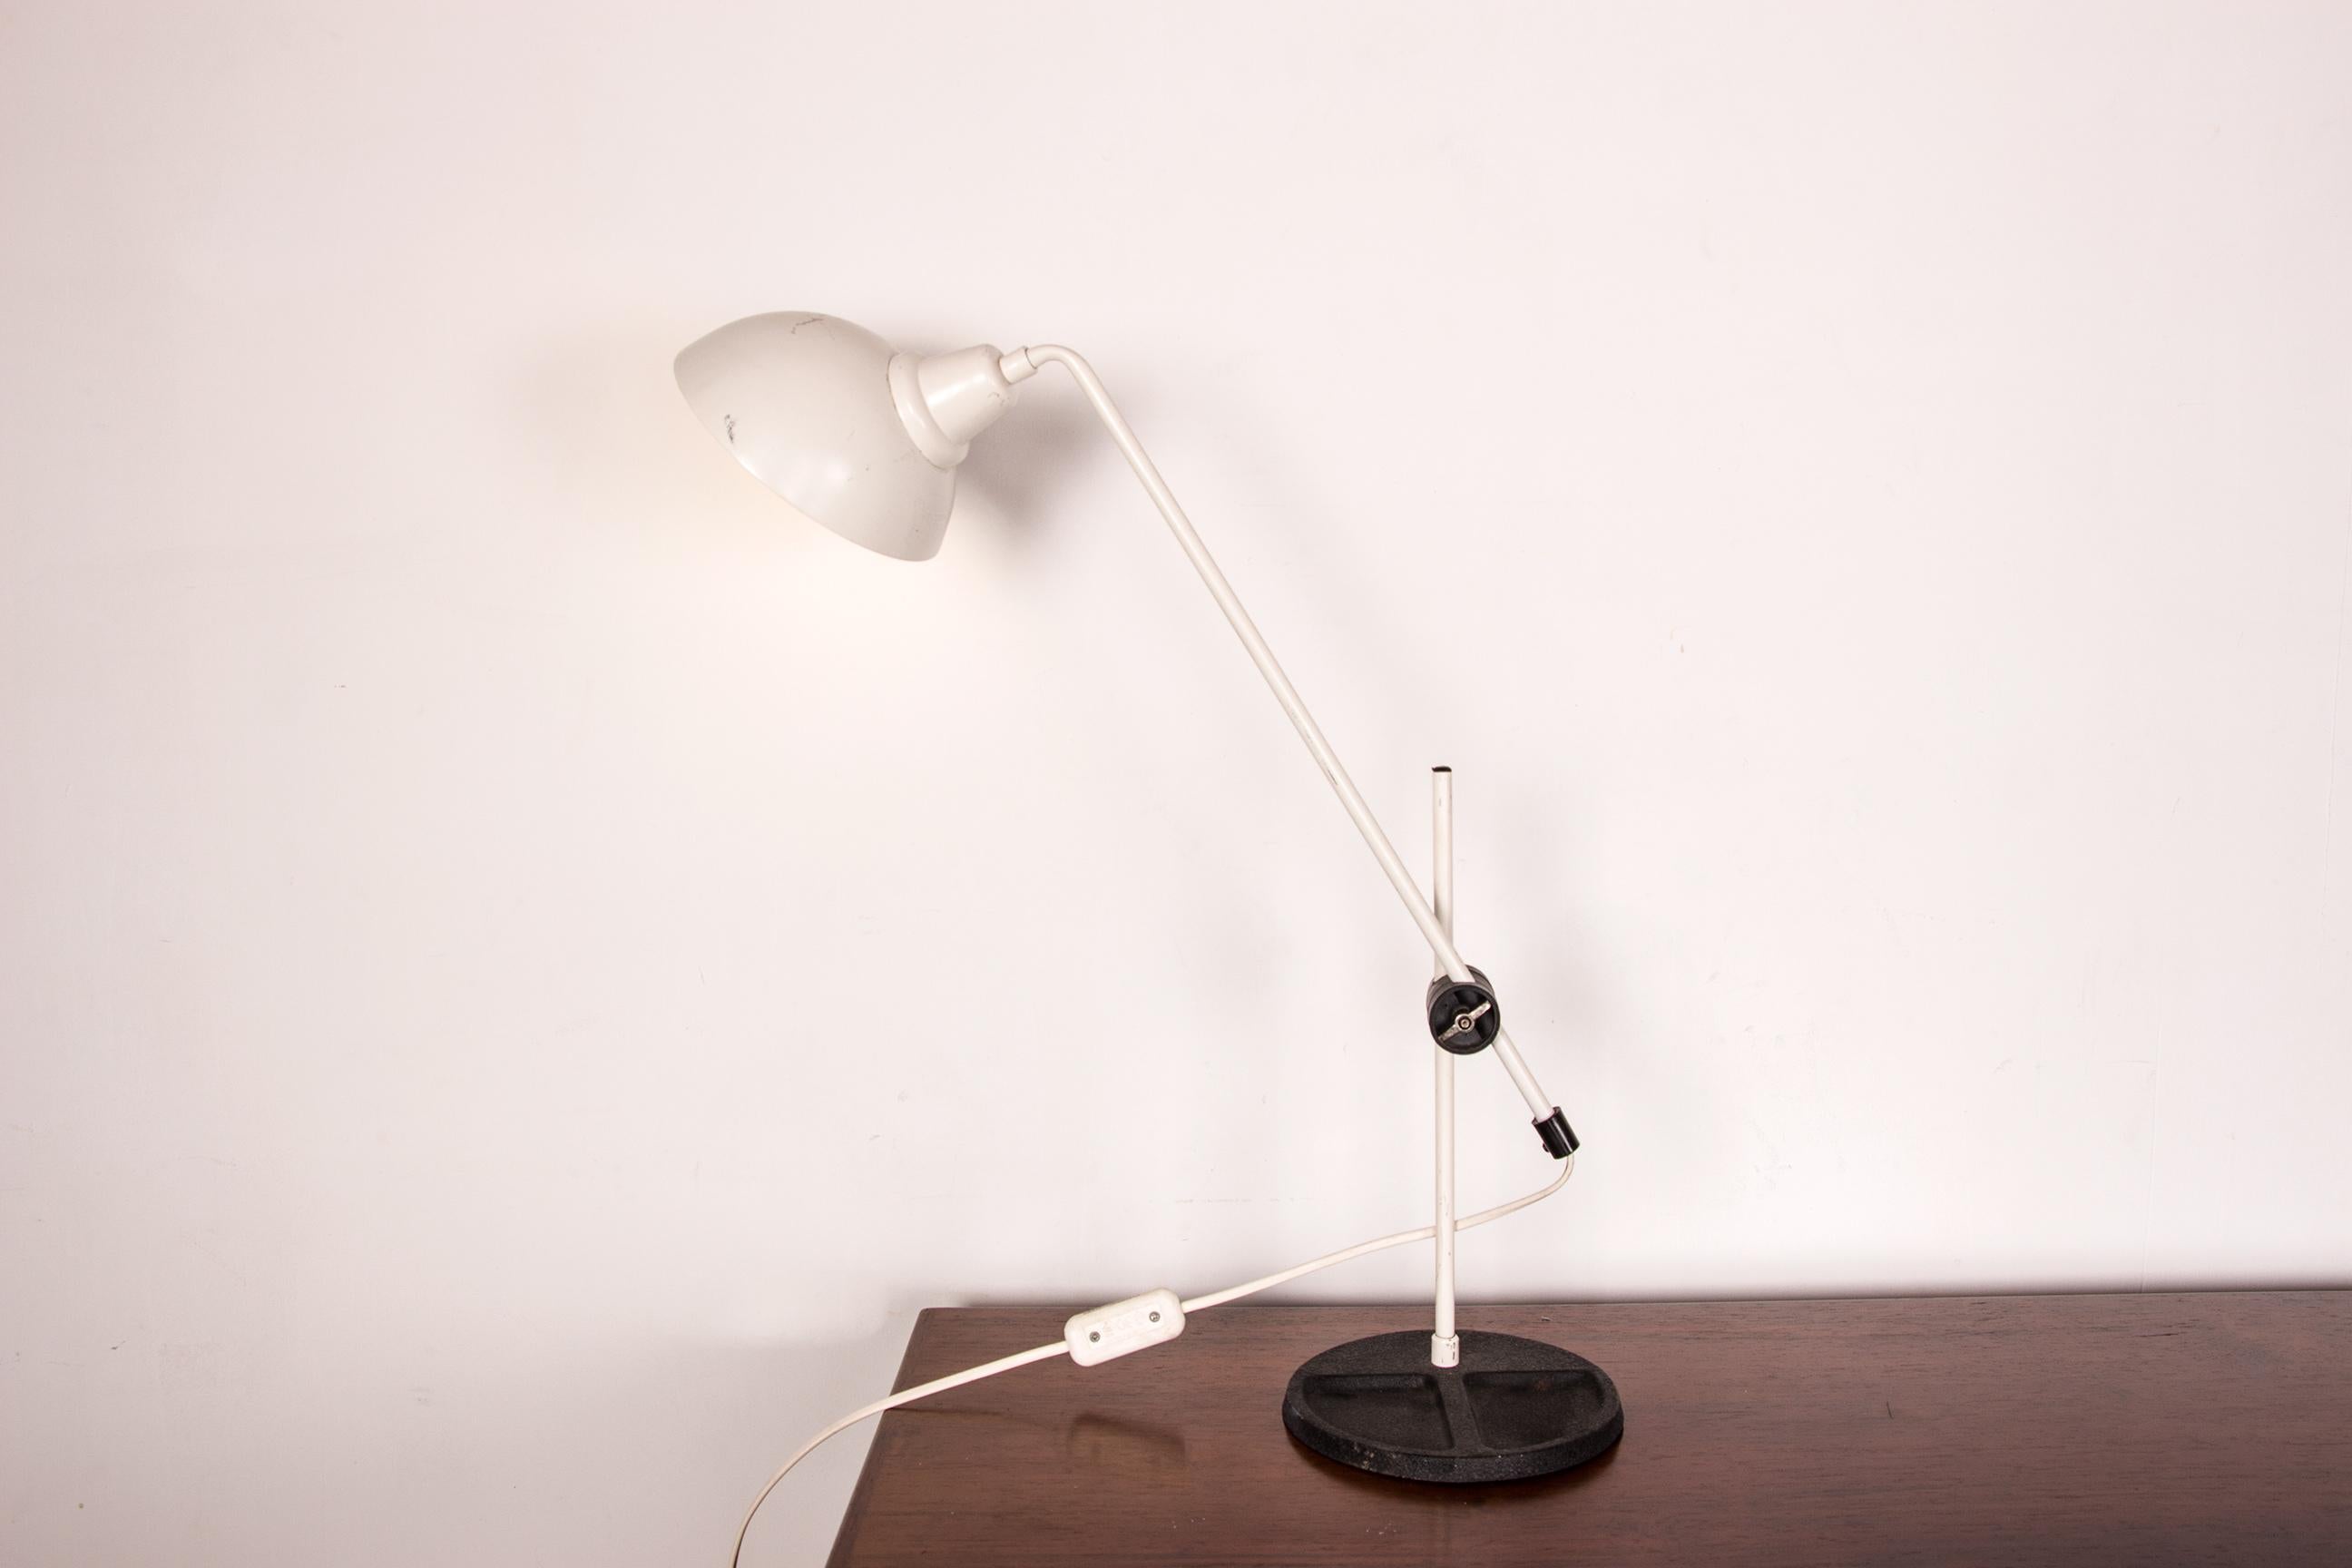 Pretty large desk lamp with articulated arm, on hammered steel base with storage spaces. Light cover in the shape of a half-globe.